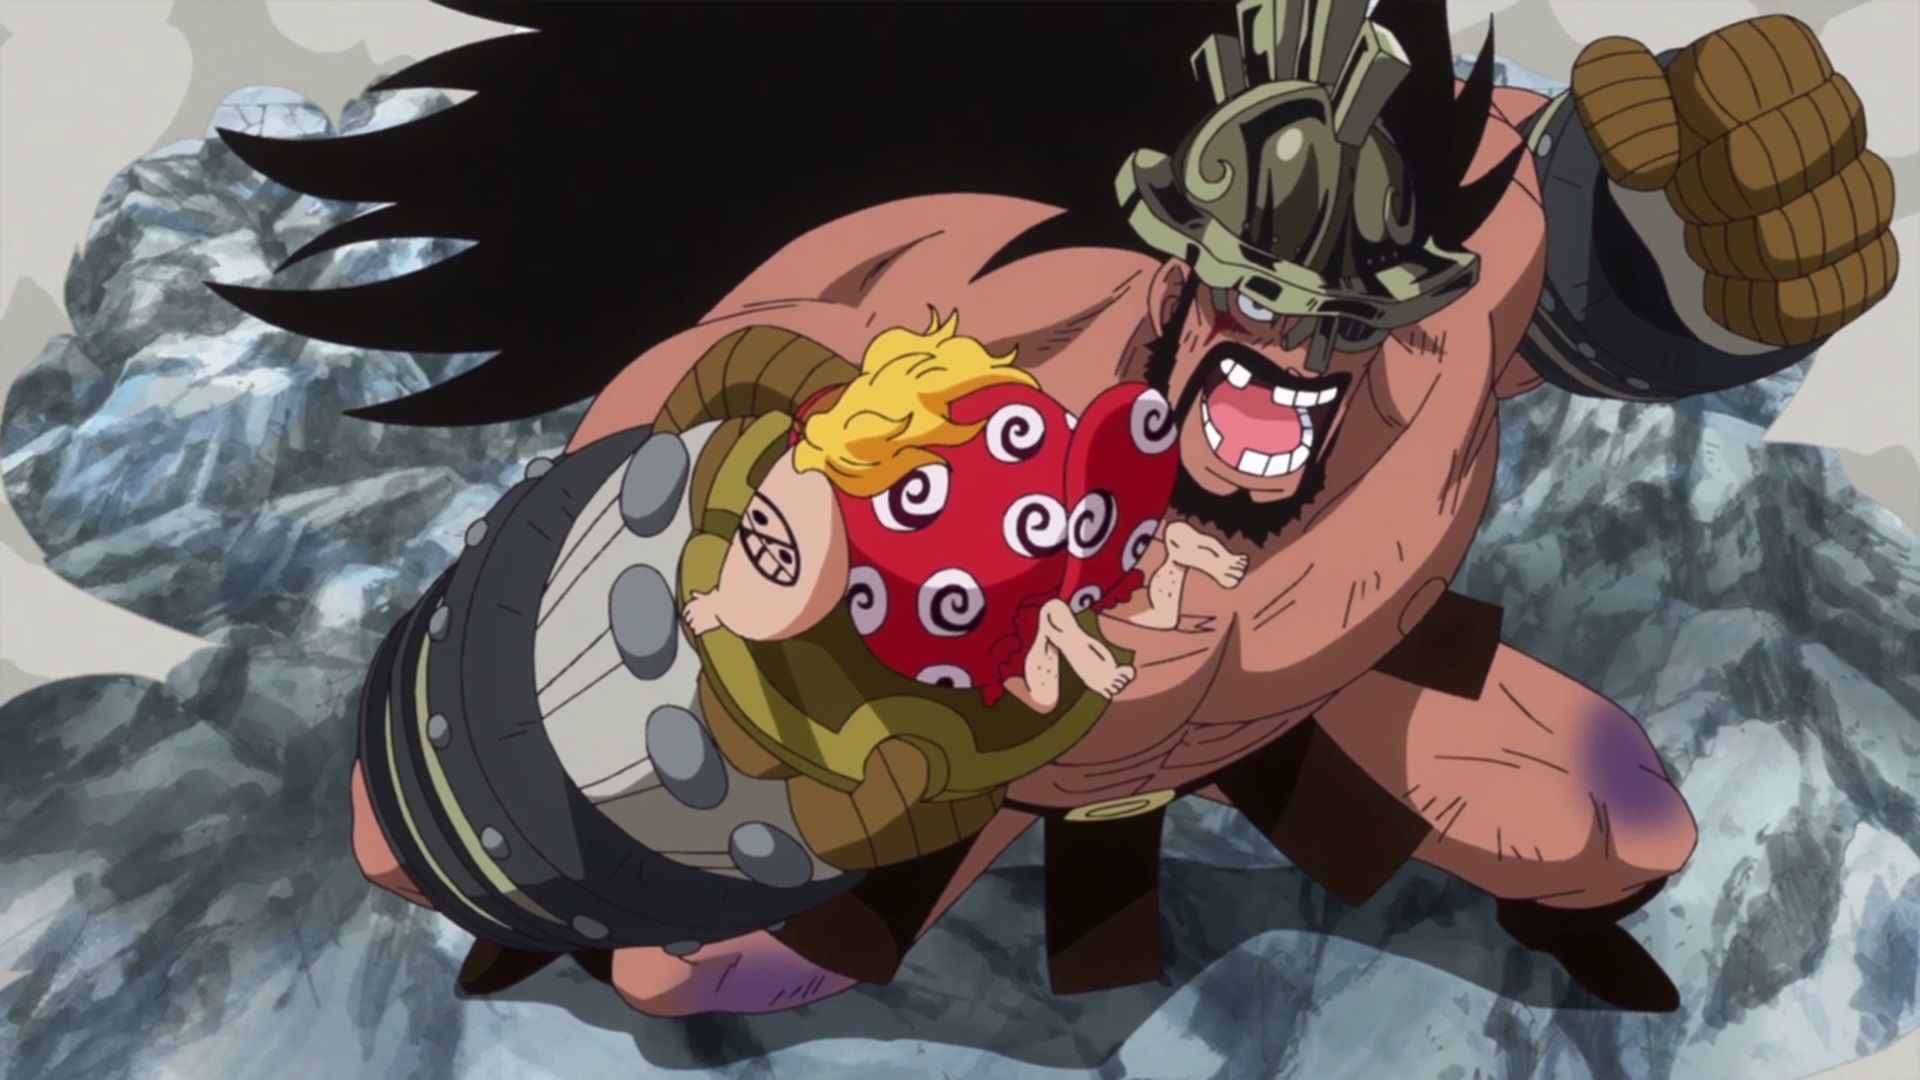 Hajrudin defeating Machvise as seen in the One Piece anime (Image via Toei Animation)